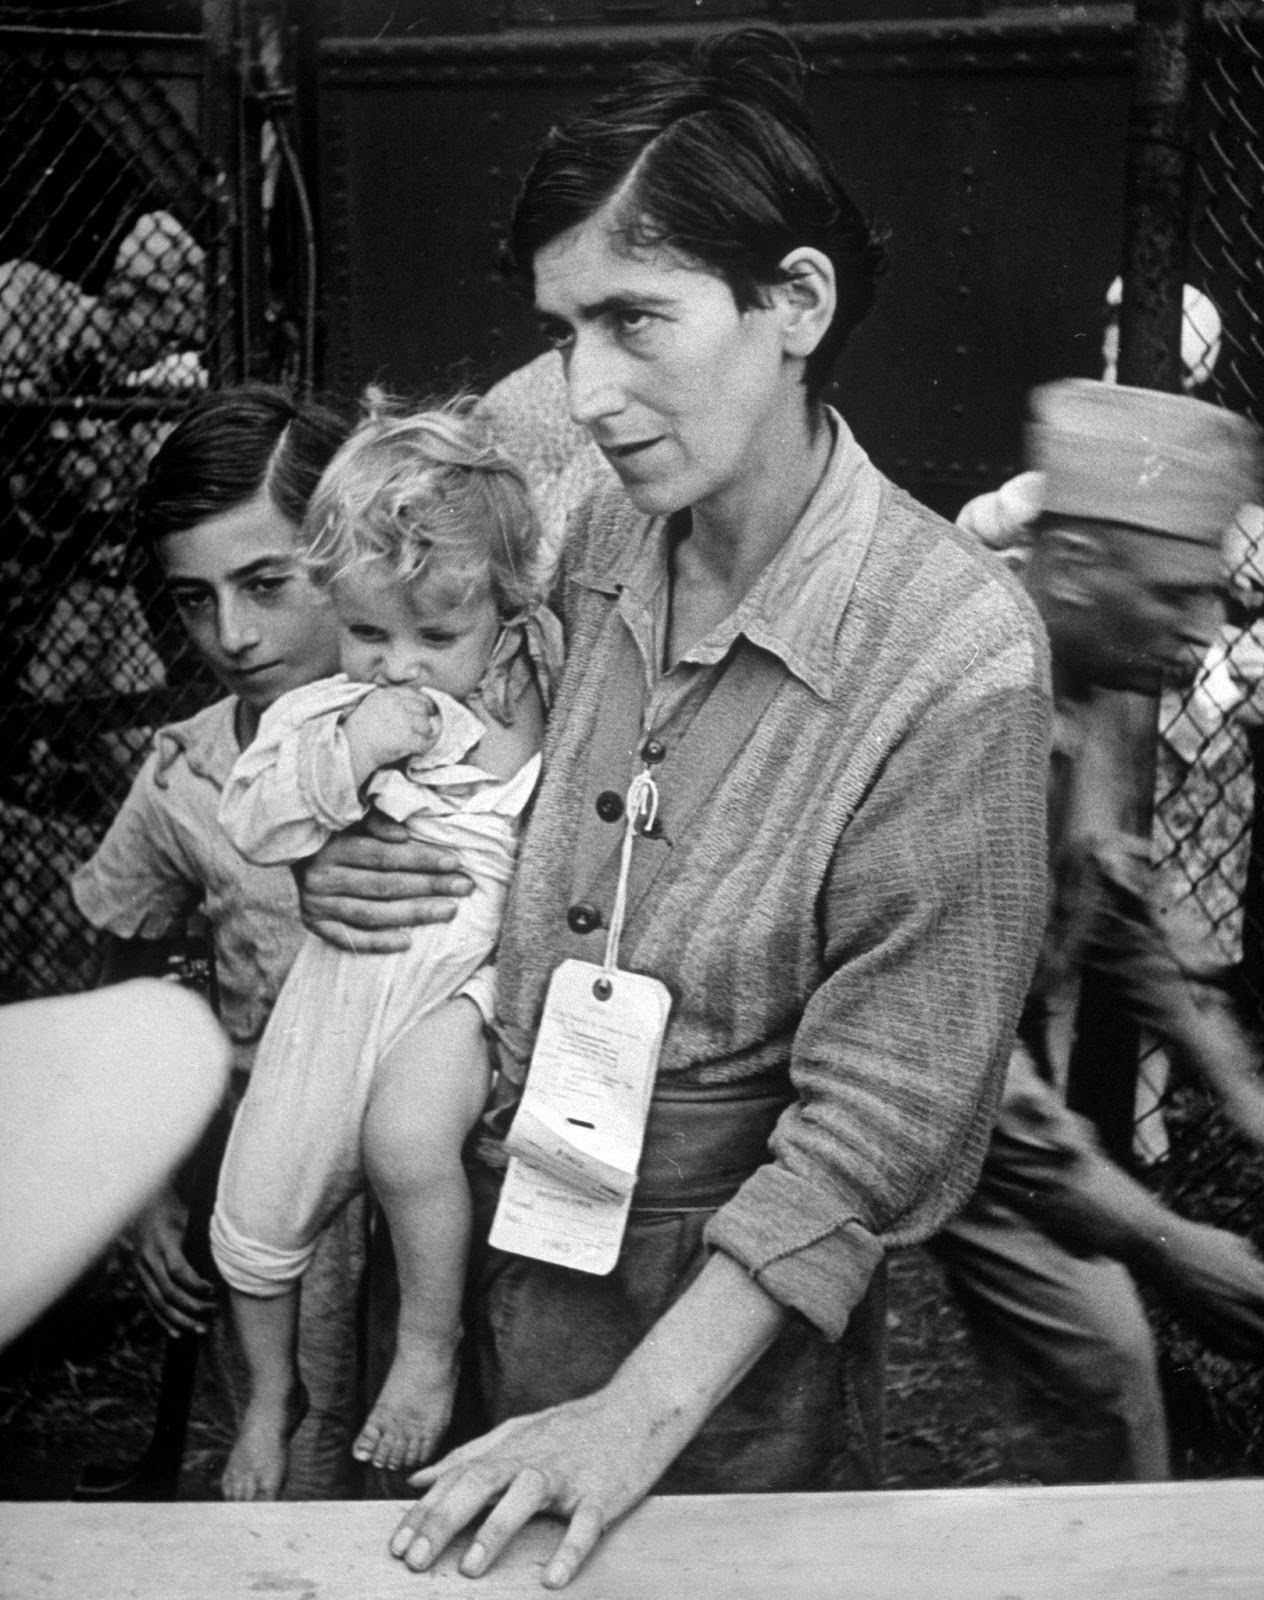 Swiss Jew Eva Bass, formerly a nightclub singer in Paris, entering refugee camp at Fort Ontario, with her children Yolanda and Joachim, whom she carried on a 60-km trek through the fighting lines to reach the American transport ship Henry Gibbins. 1944.